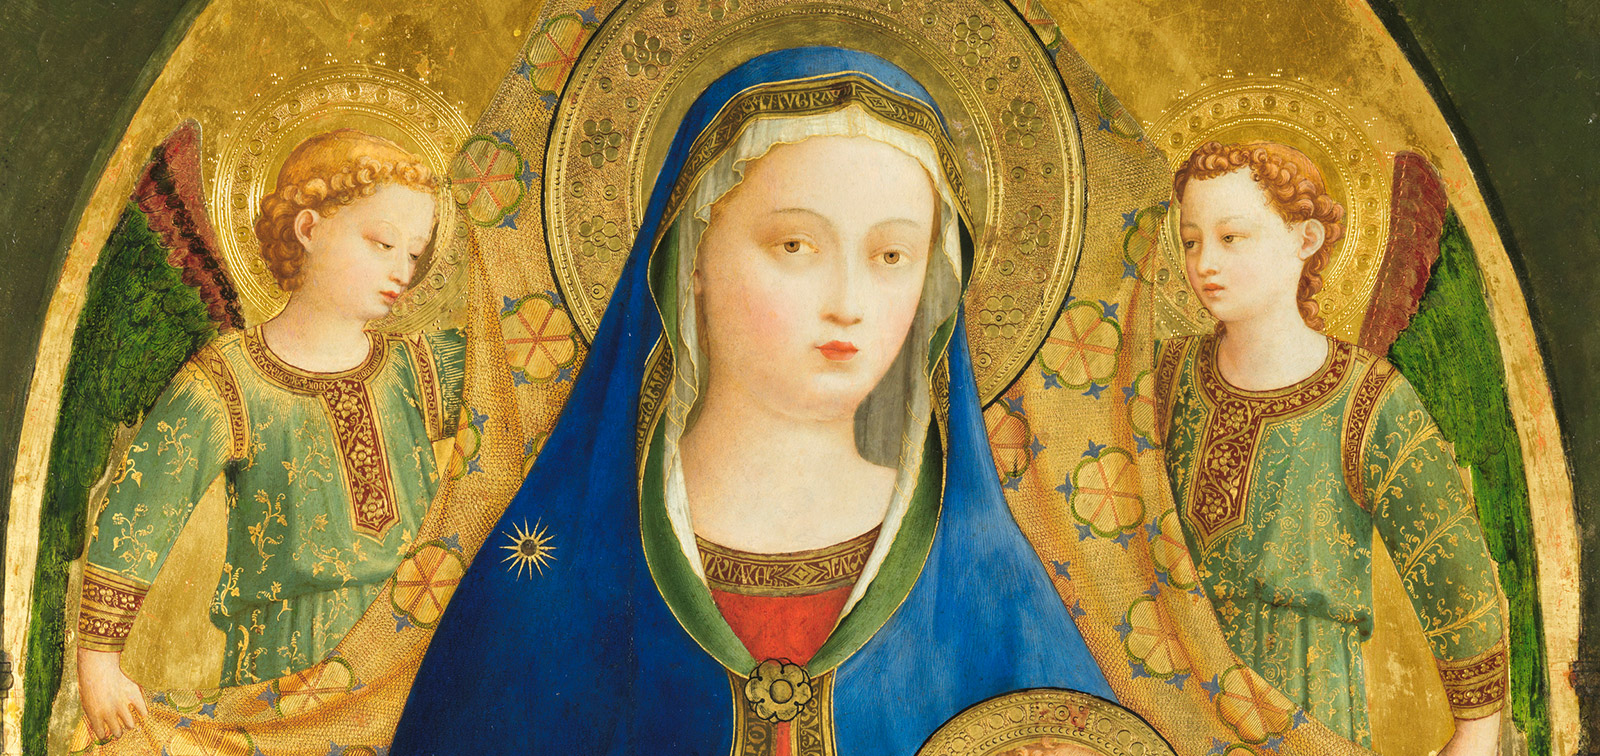 Fra Angelico and the Rise of the Florentine Renaissance